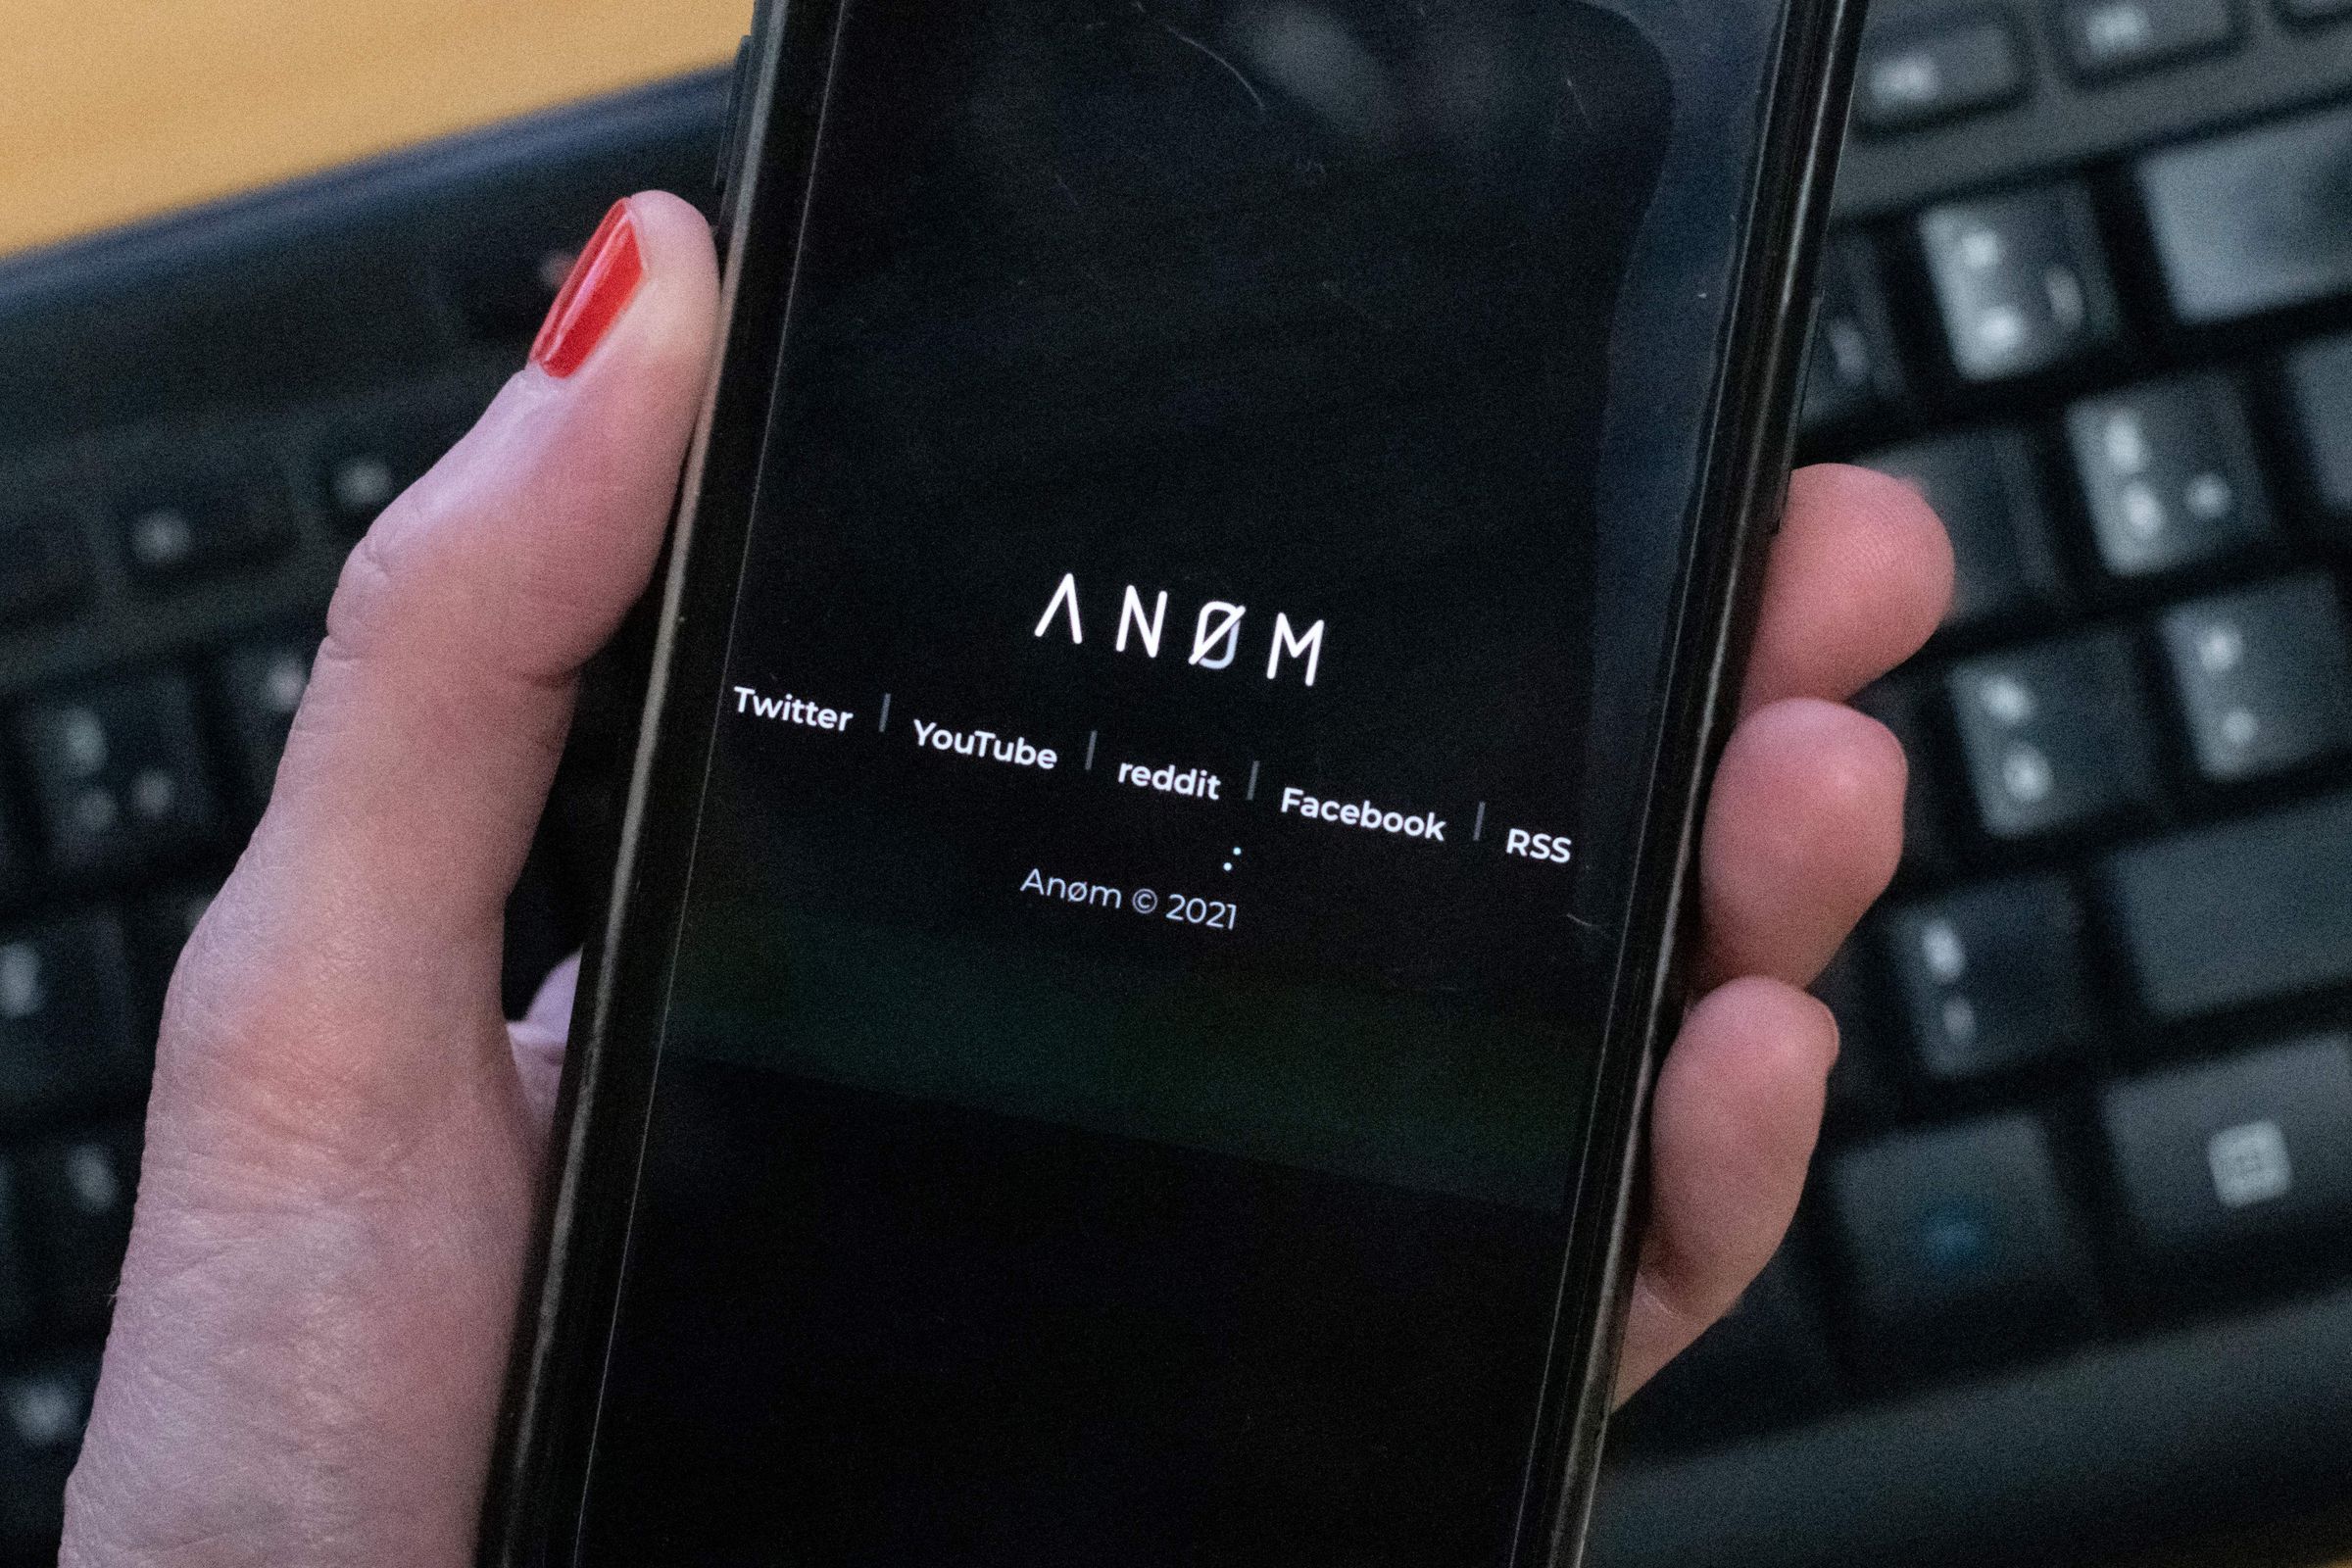 An image of an Anom phone.